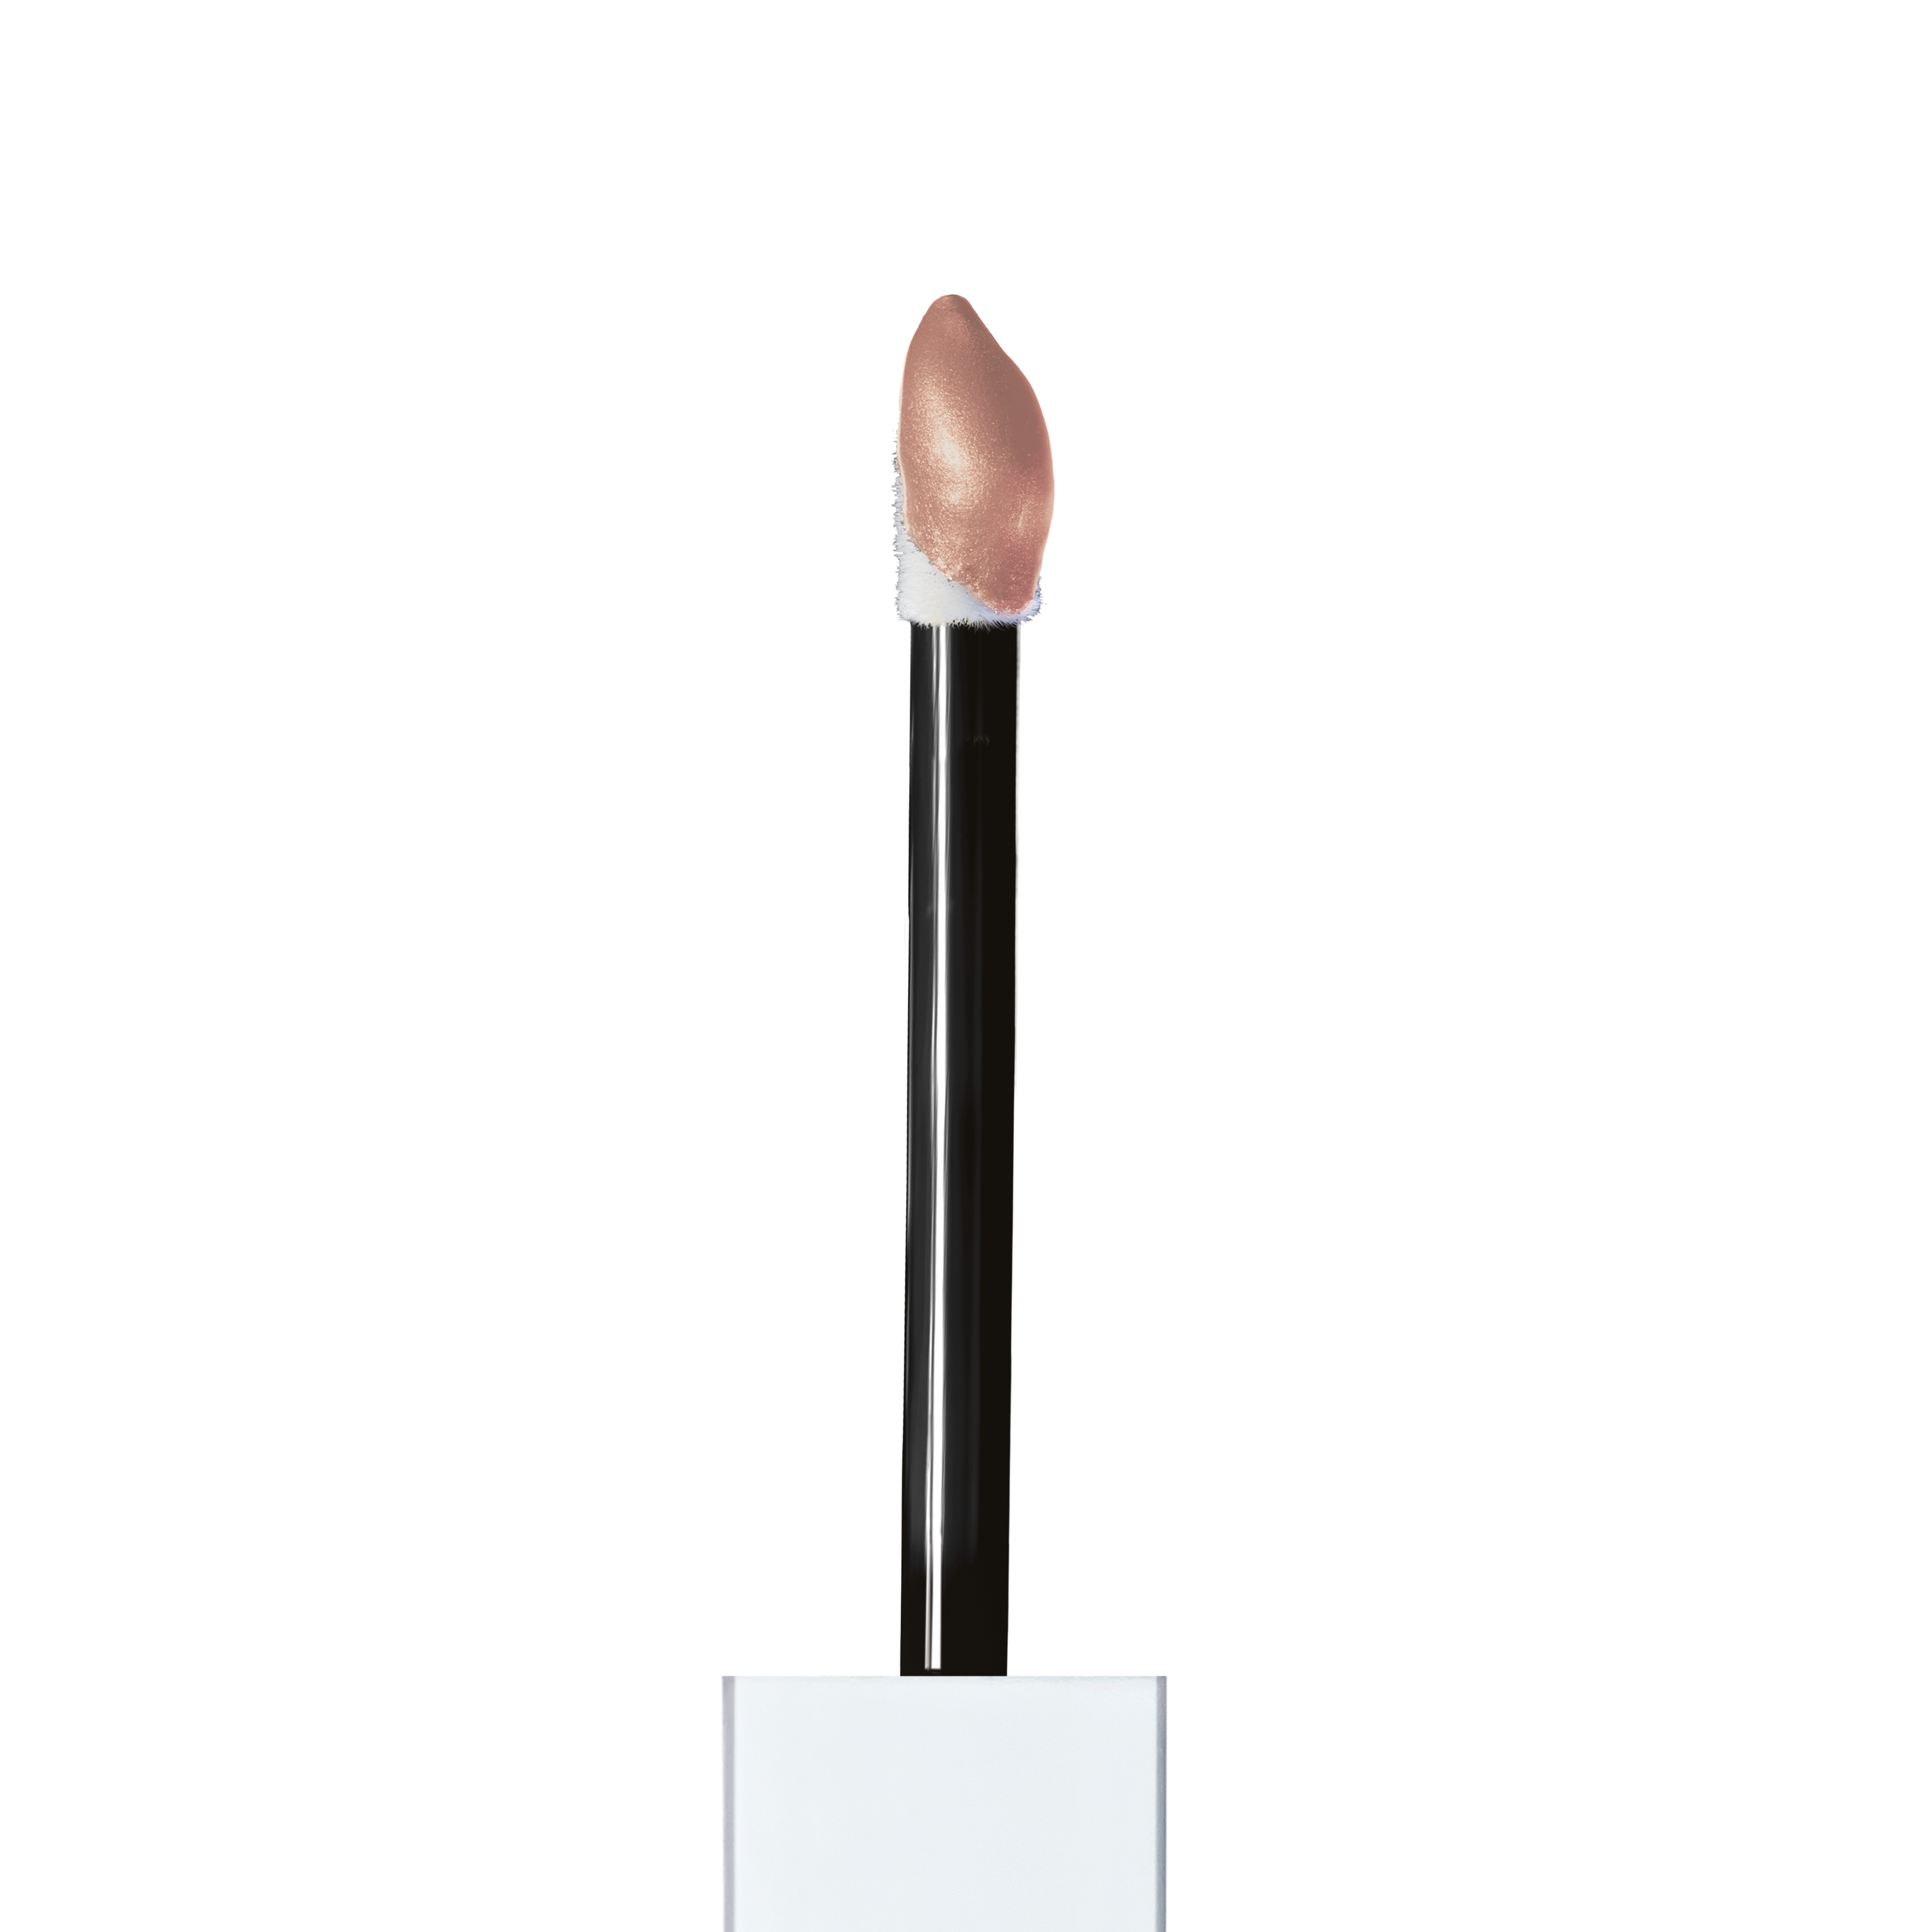 Maybelline Summer Mckeen Lip Gloss Makeup Ultra Shiny Glossy Finish, Tan Line - image 5 of 10